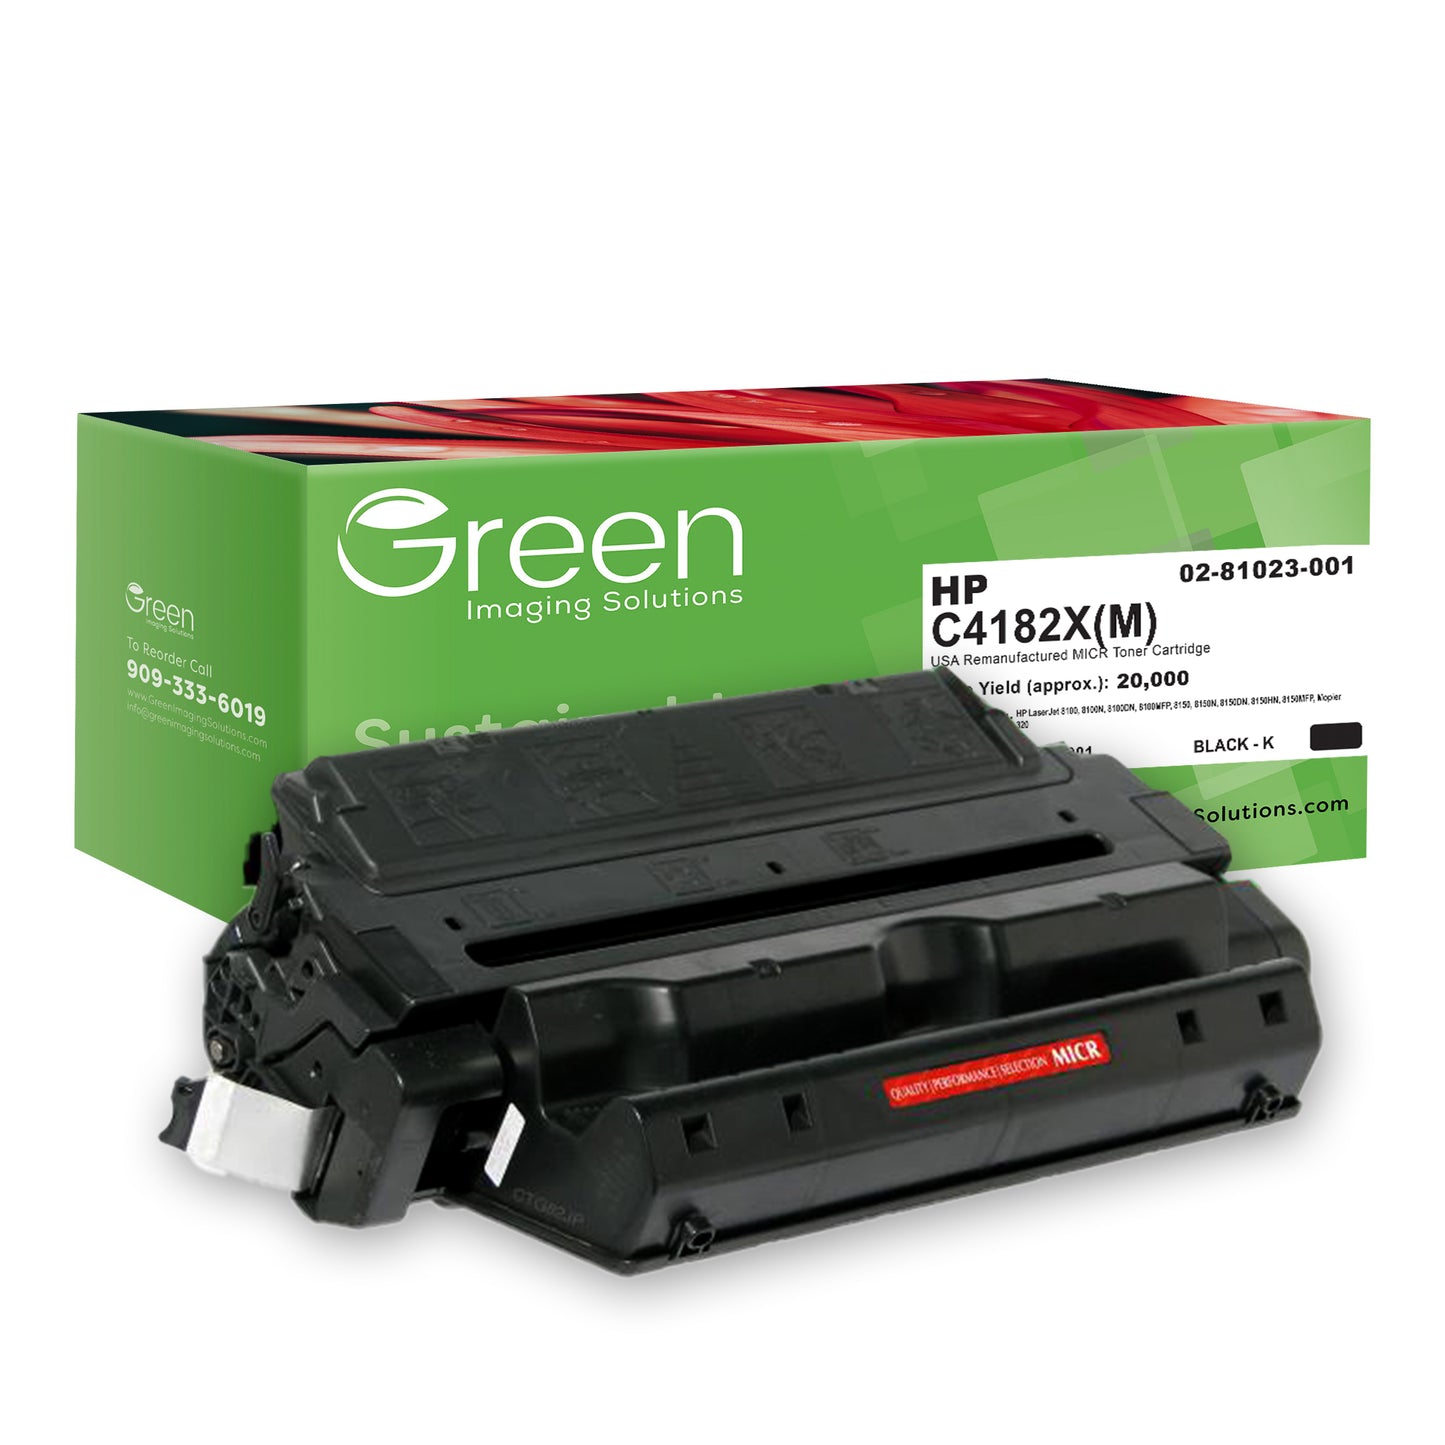 GIS USA Remanufactured MICR Toner Cartridge for HP C4182X, TROY 02-81023-001